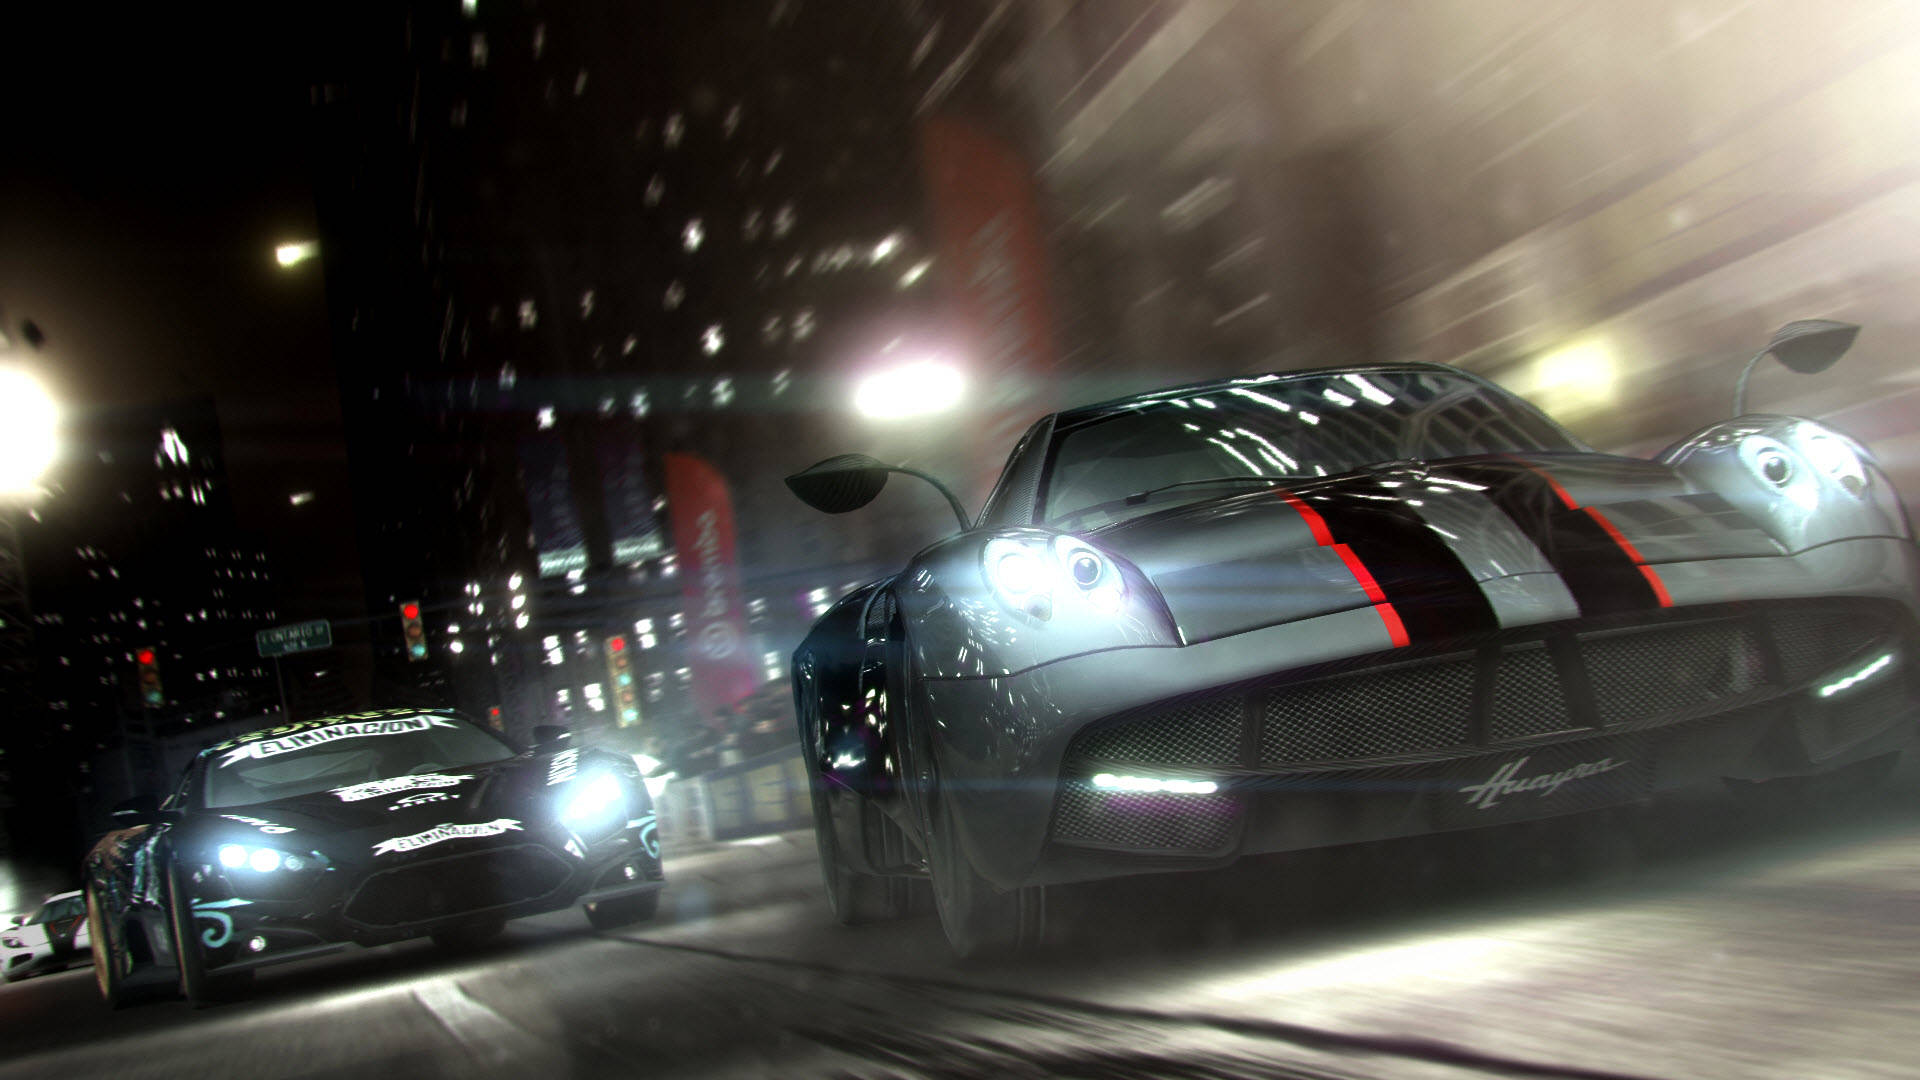 Fast-paced Racing In The City: Grid 2